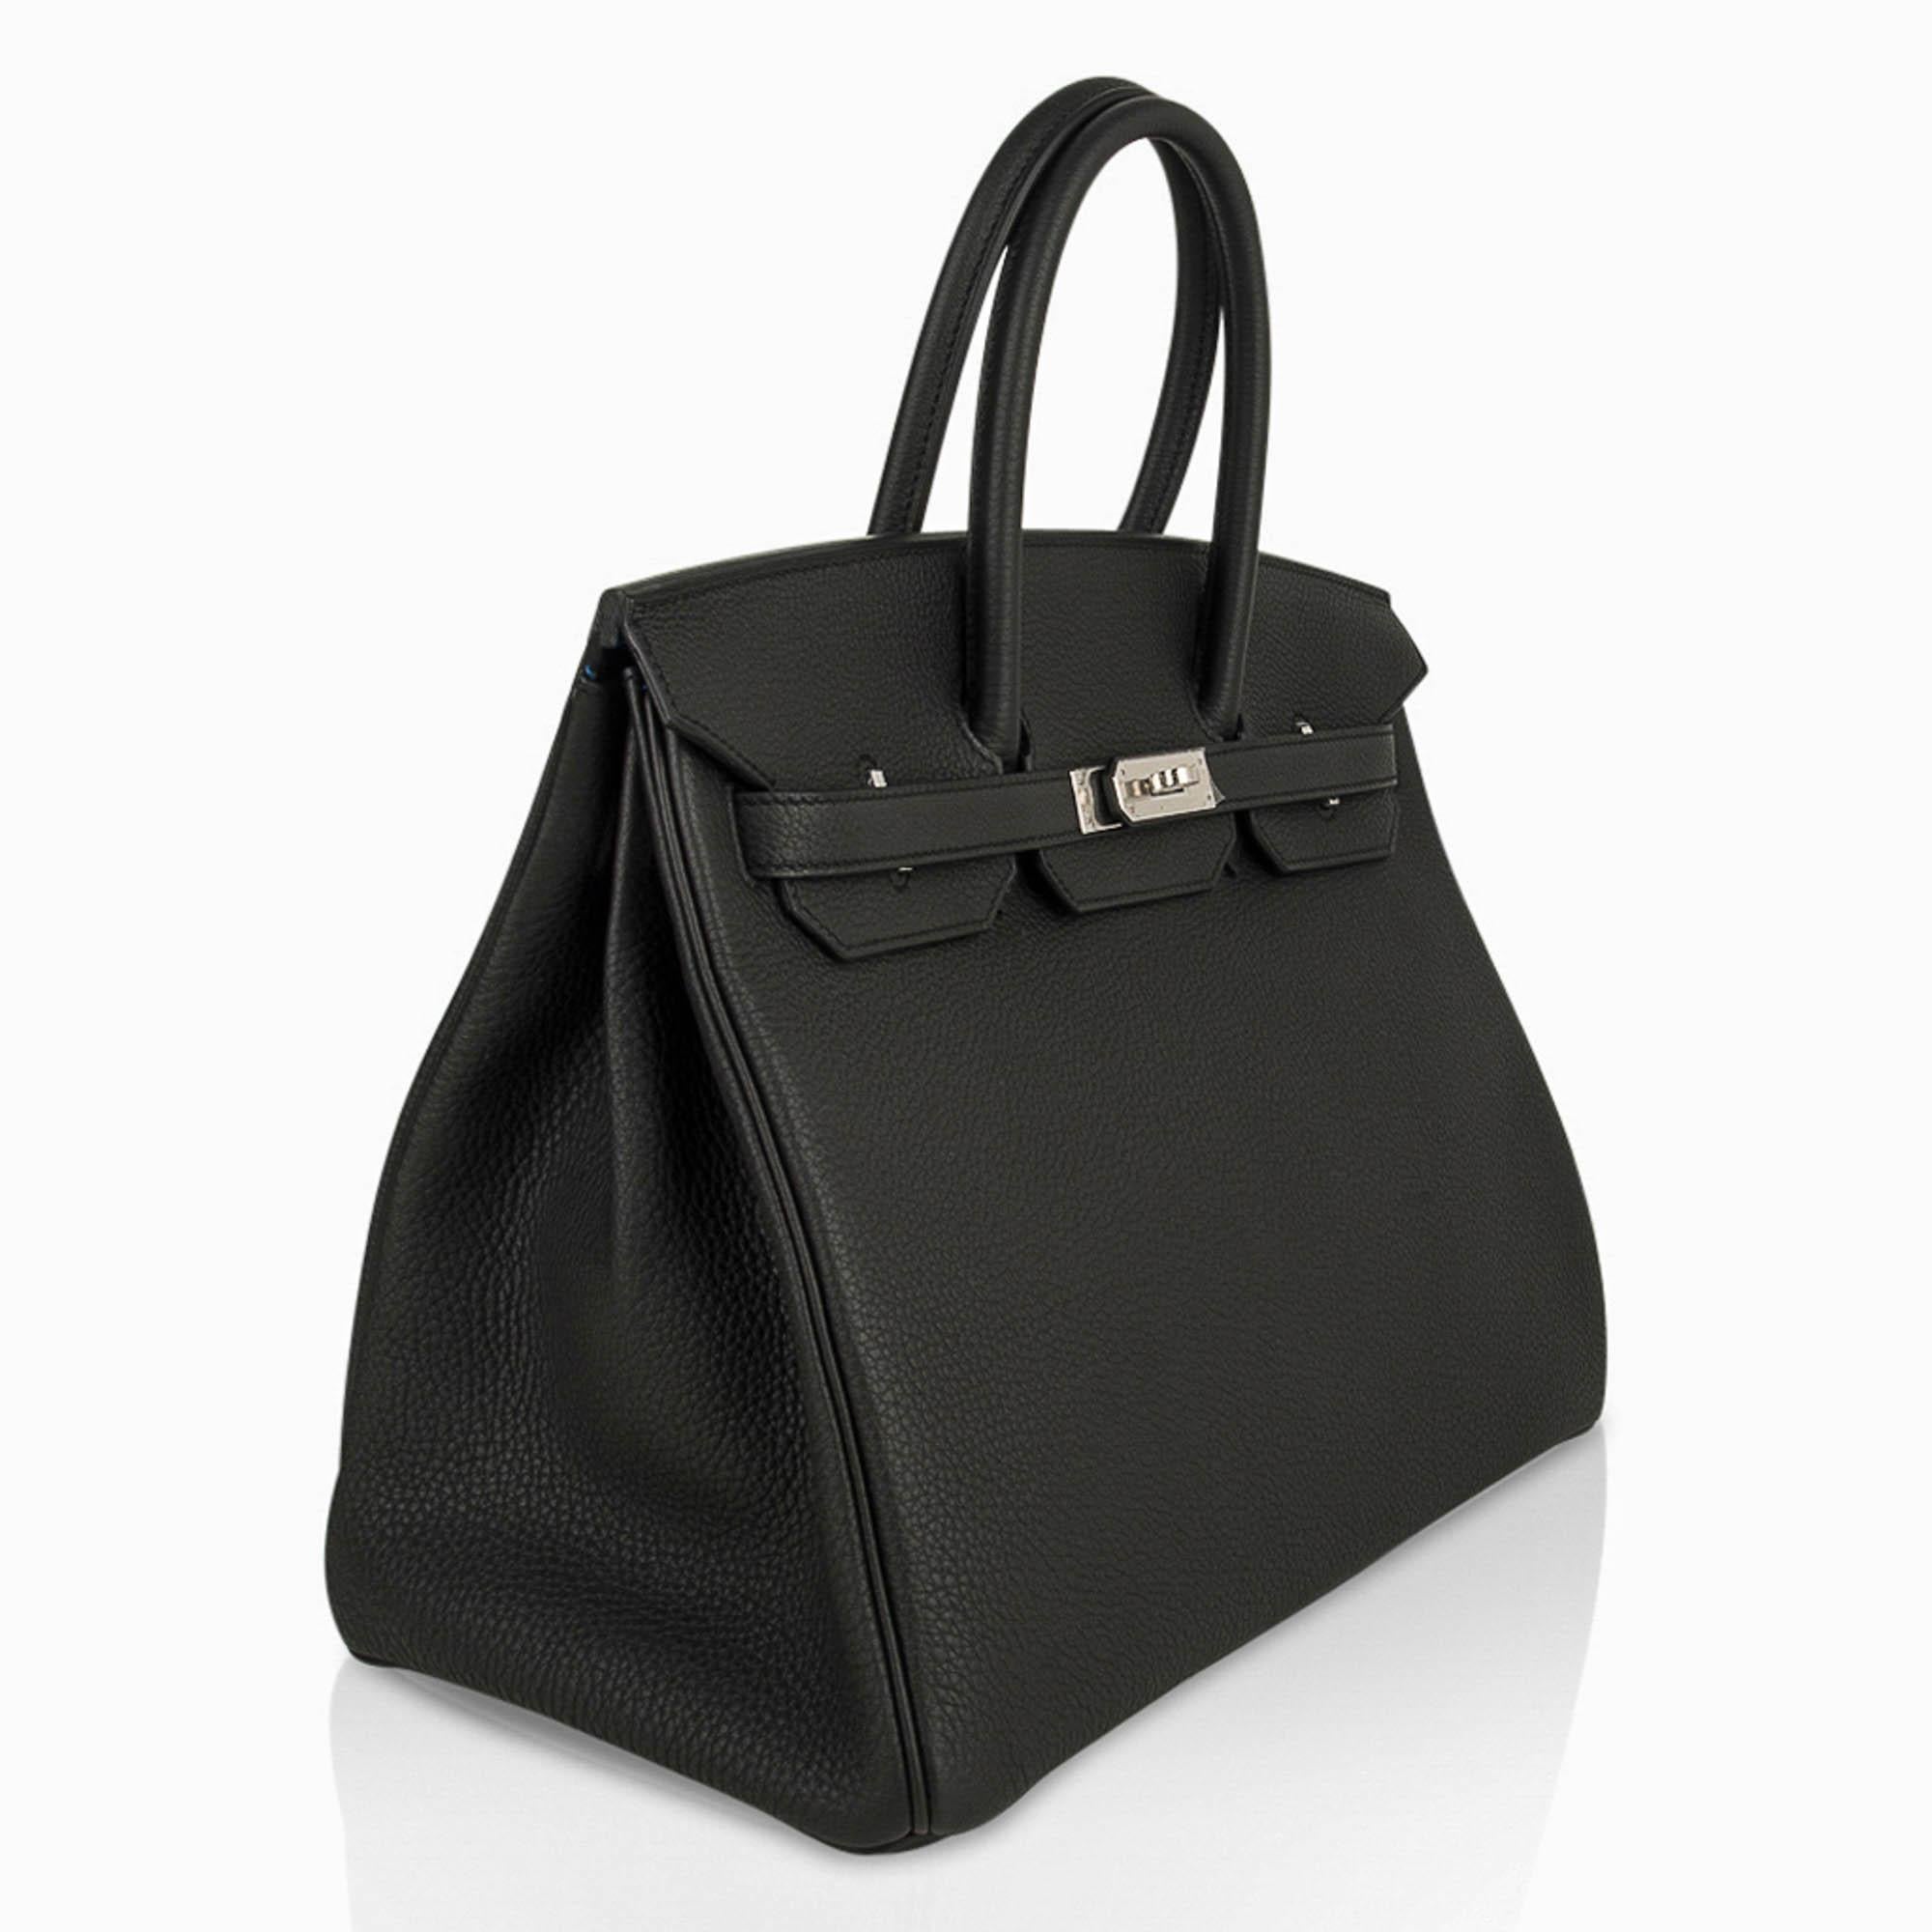 Mightychic offers an Hermes Birkin Verso 35 bag features Black with Blue Agate interior. 
Beautifully grained Togo that actually is matte to the eye - it is fabulous!
Fresh with Palladium hardware. 
Comes with lock, keys, clochette, sleeper,